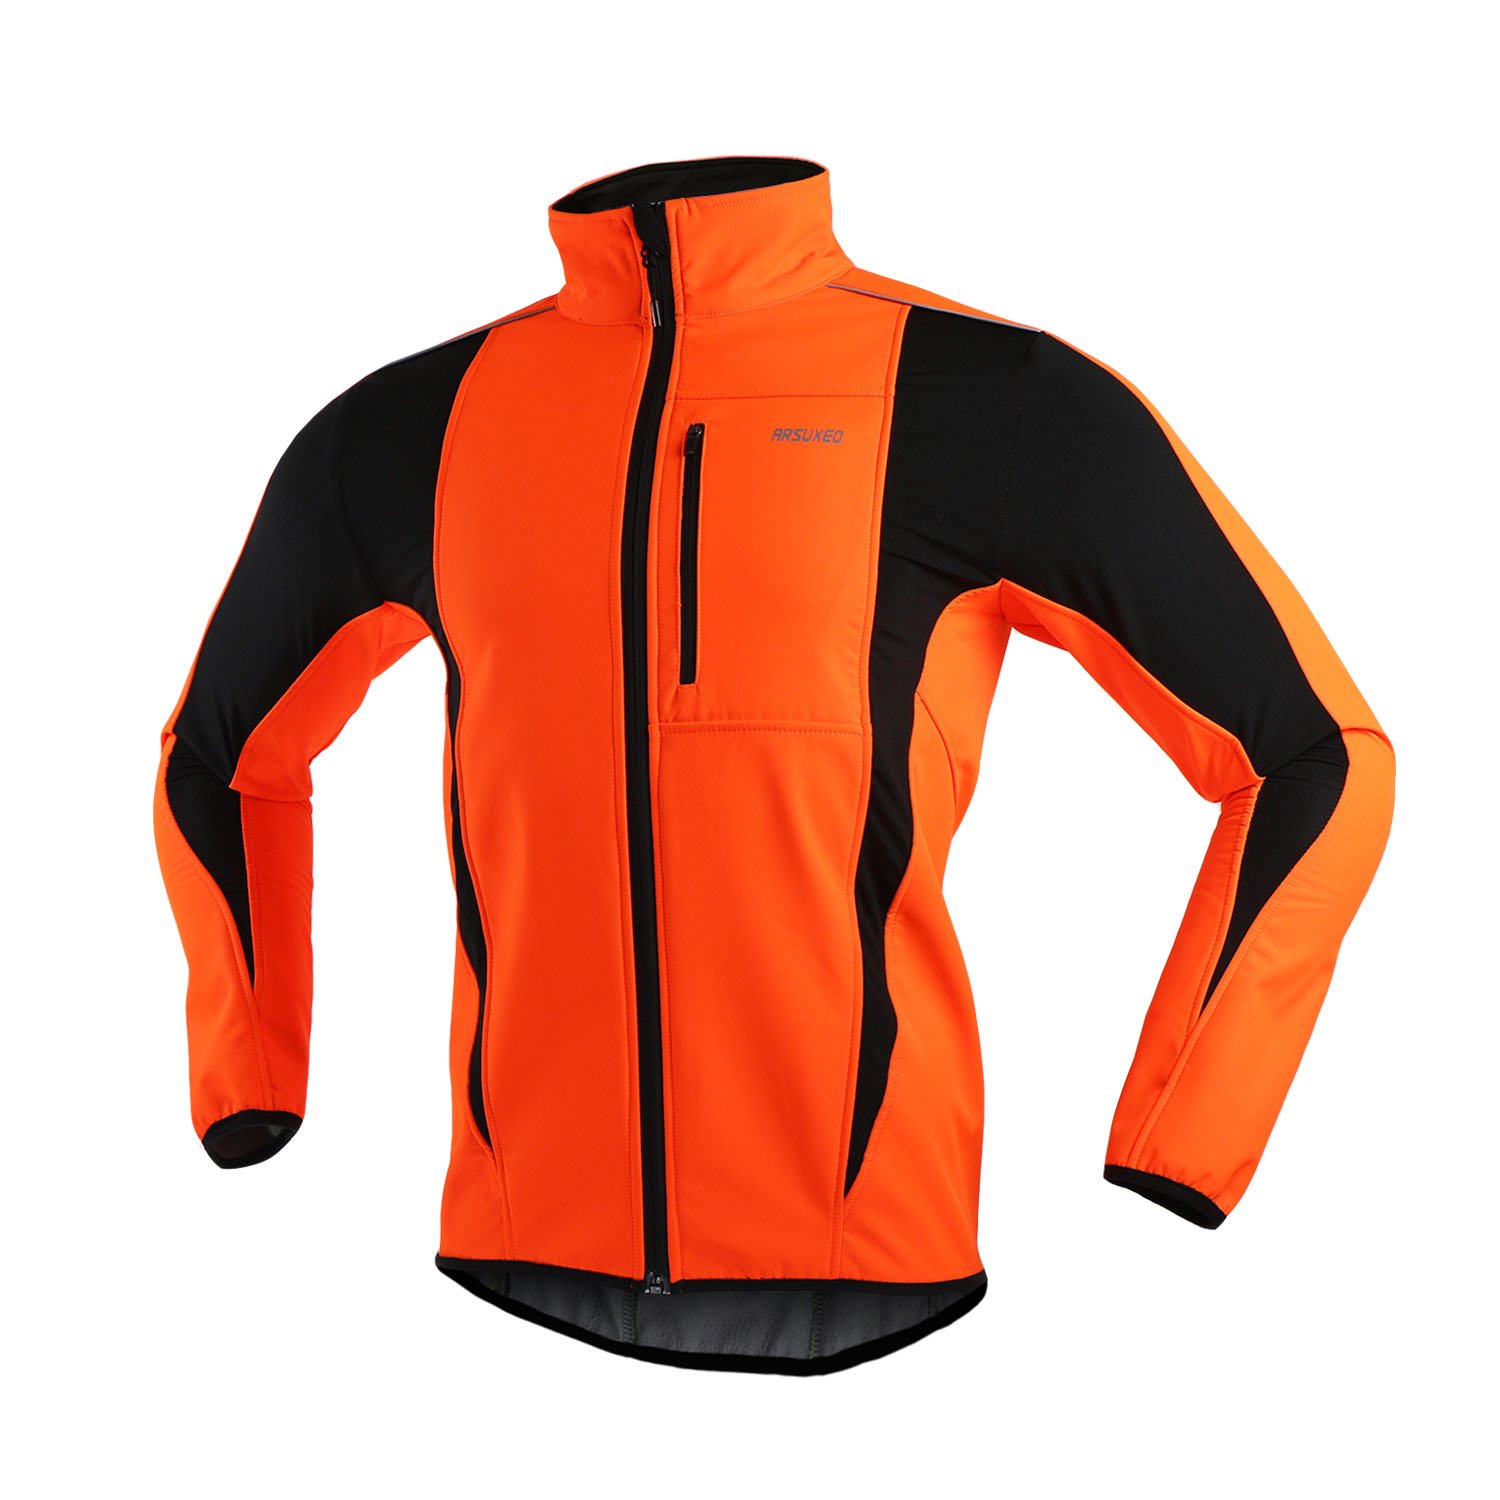 Arsuxeo Winter Warm Up Thermal Softshell Cycling Jacket Windproof Waterproof Bicycle Mtb Mountain Bike Clothes 15-K Orange Size 